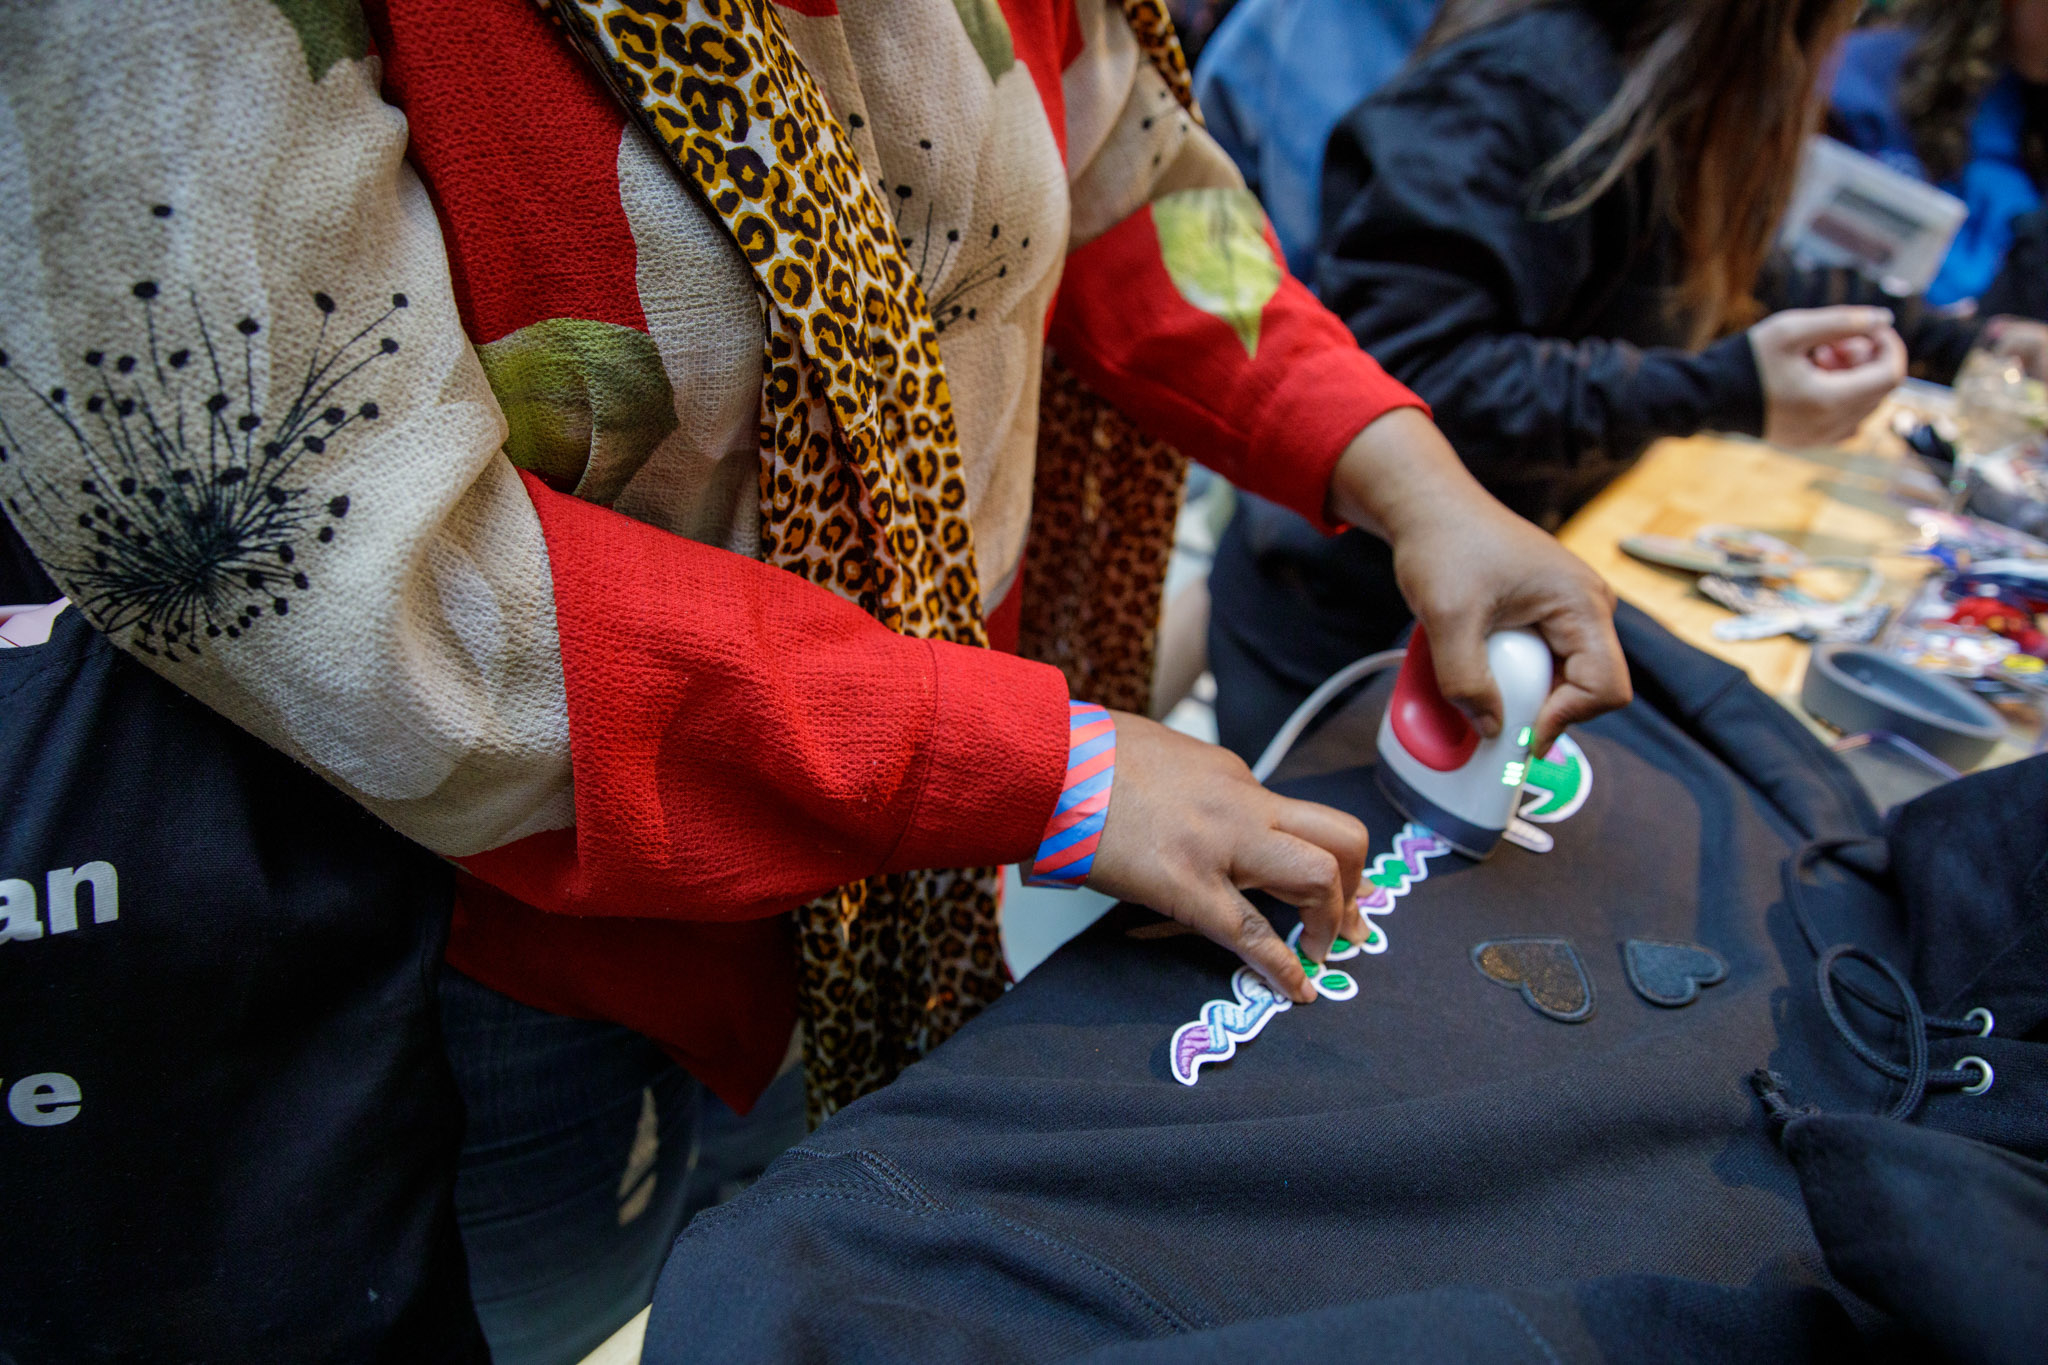 Person using a small iron to apply colorful patches to a black garment at a craft table